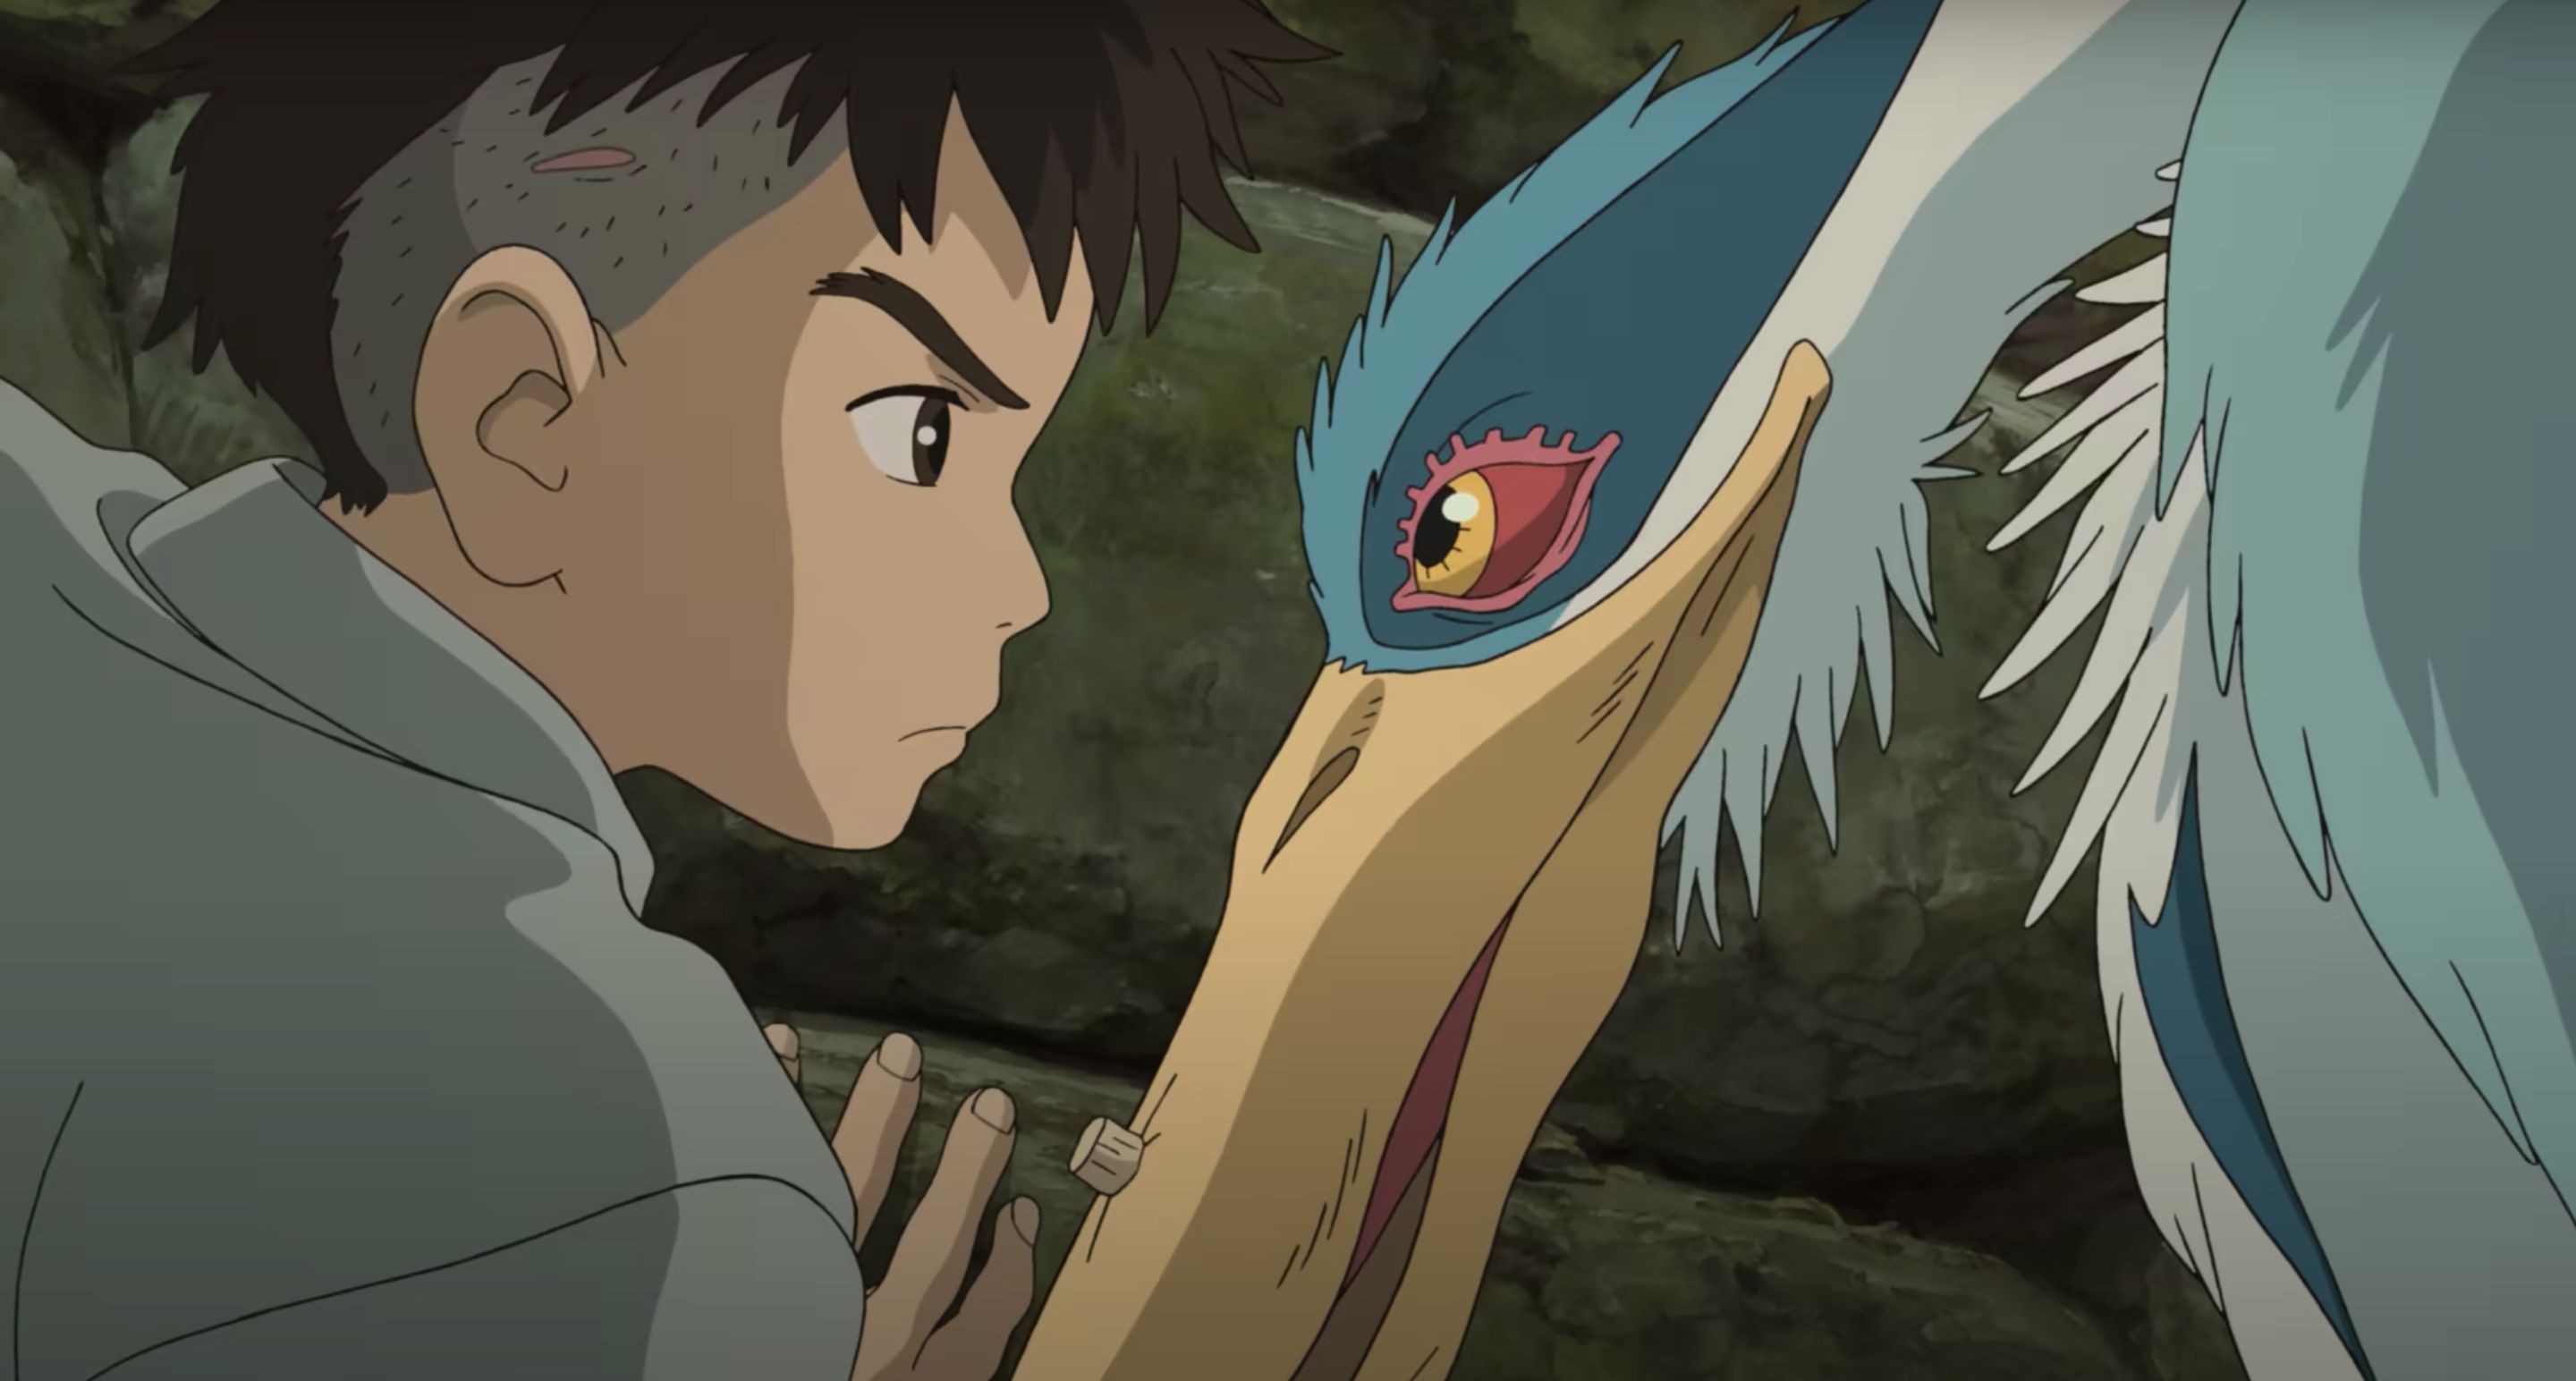 The Boy and the Heron Review: "And how will you live?"